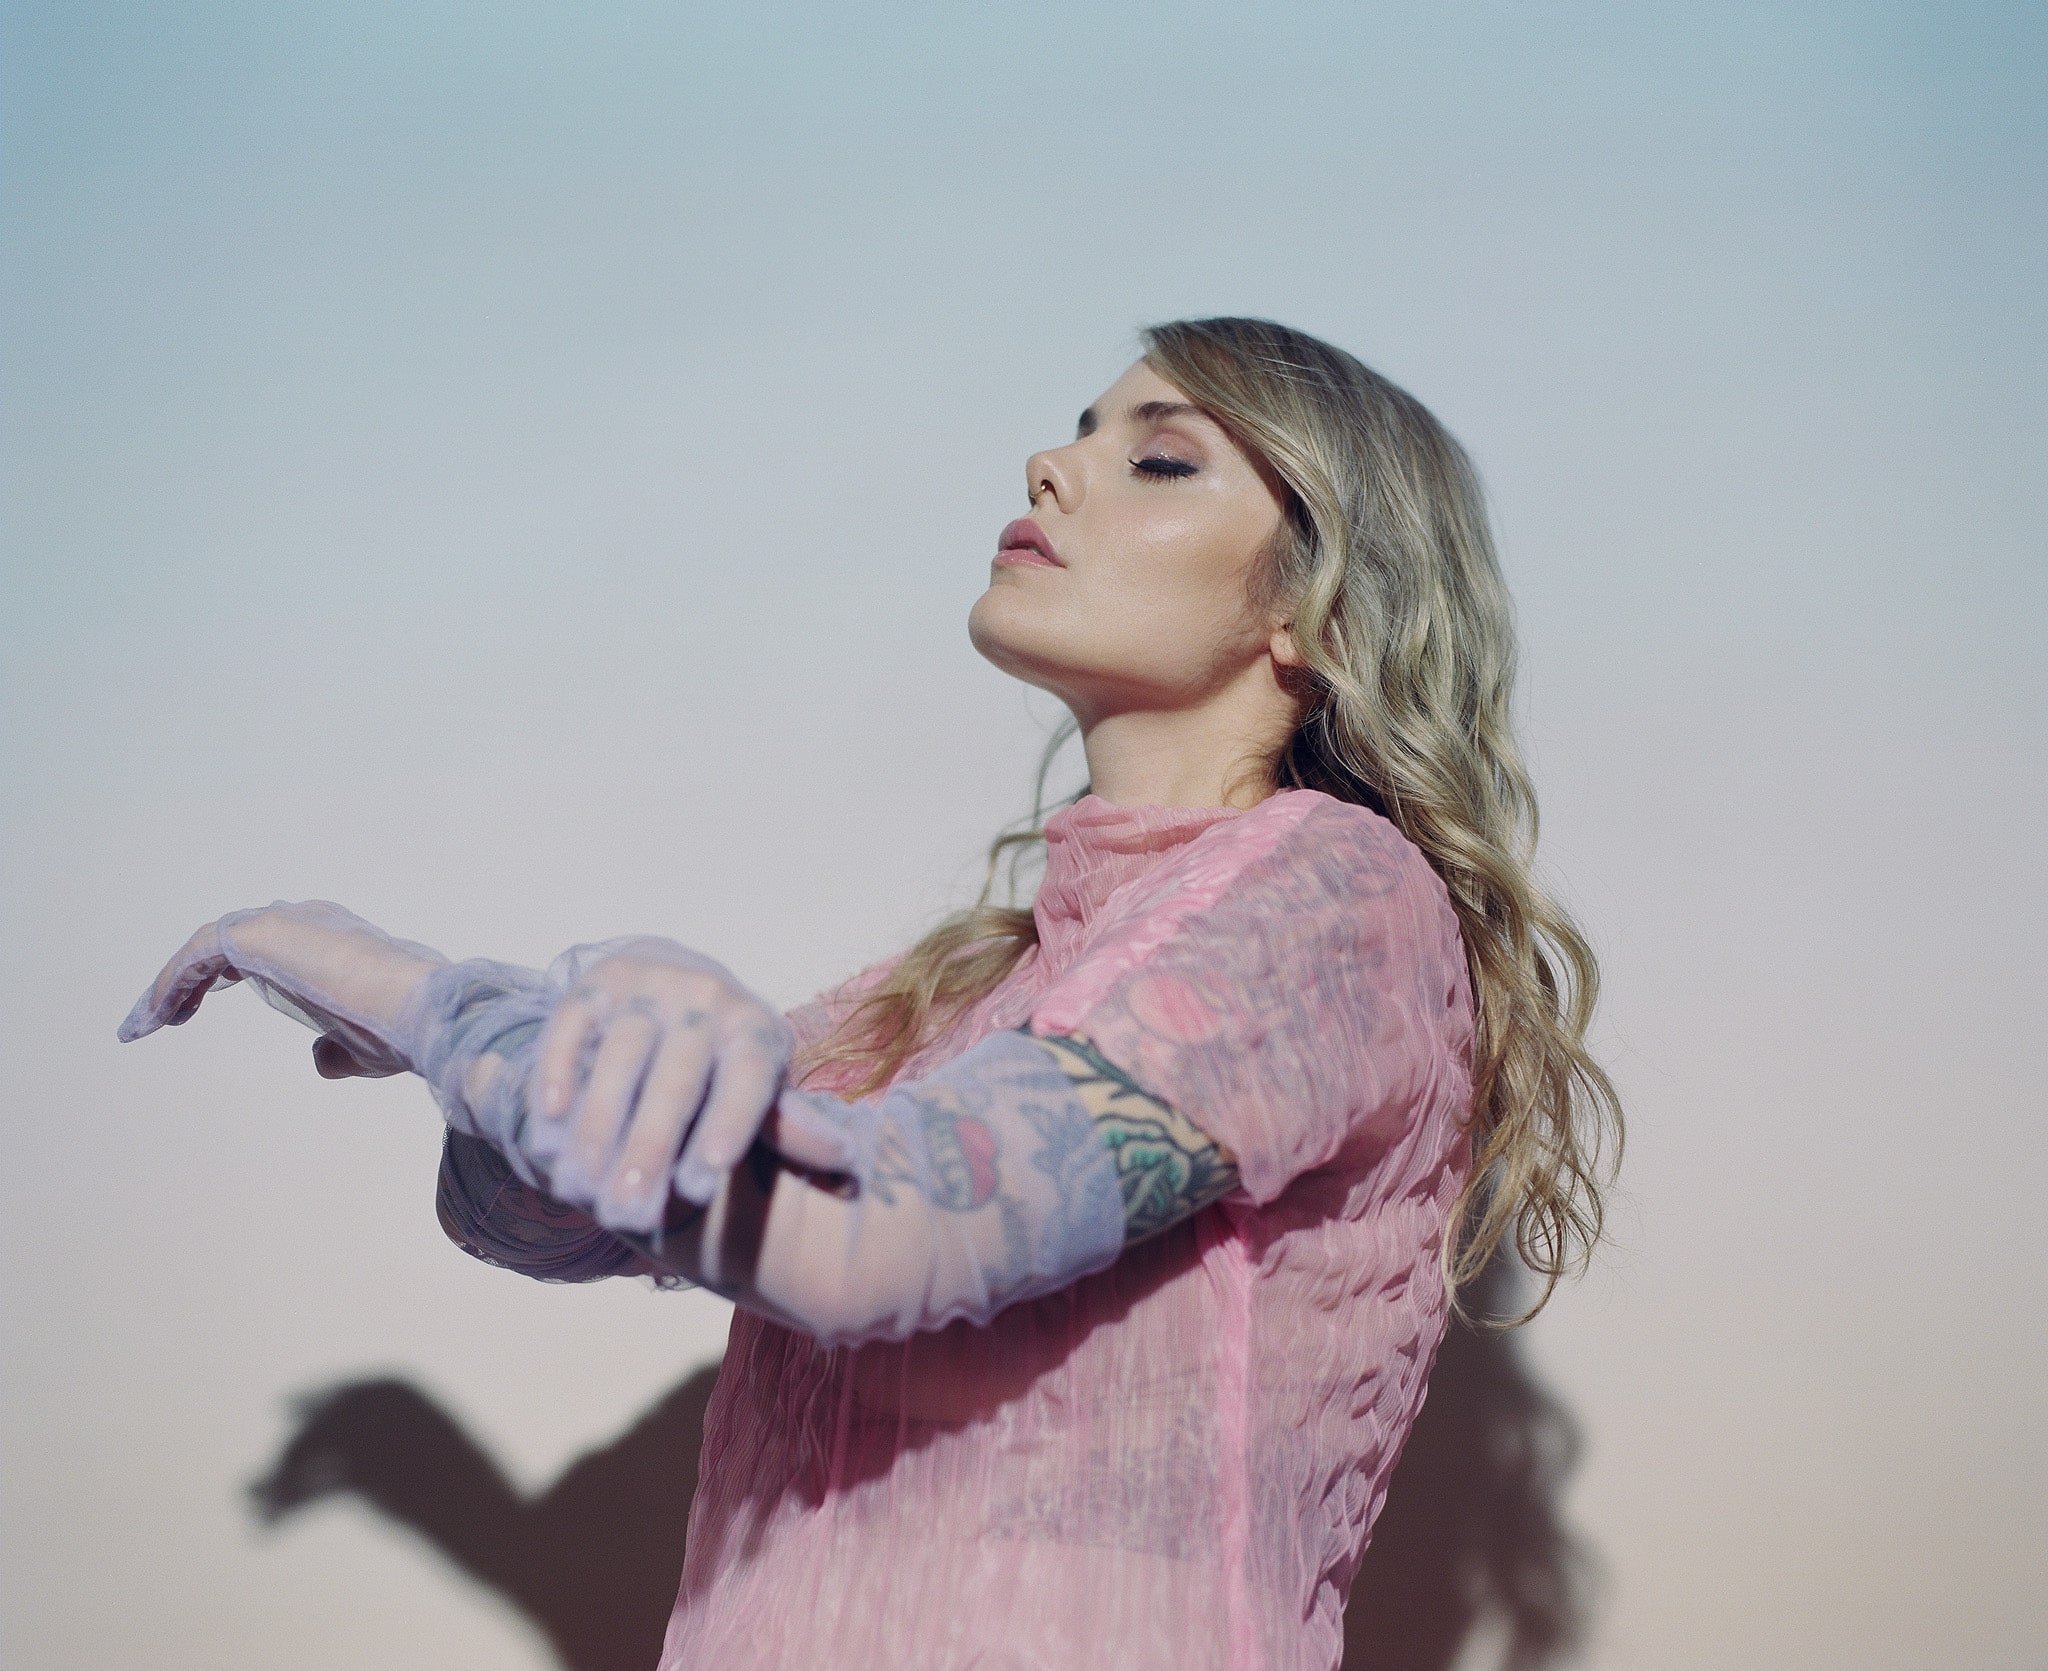 Under scarlet lights, Coeur de pirates lyrical disco gets our hearts pumping Xtra Magazine